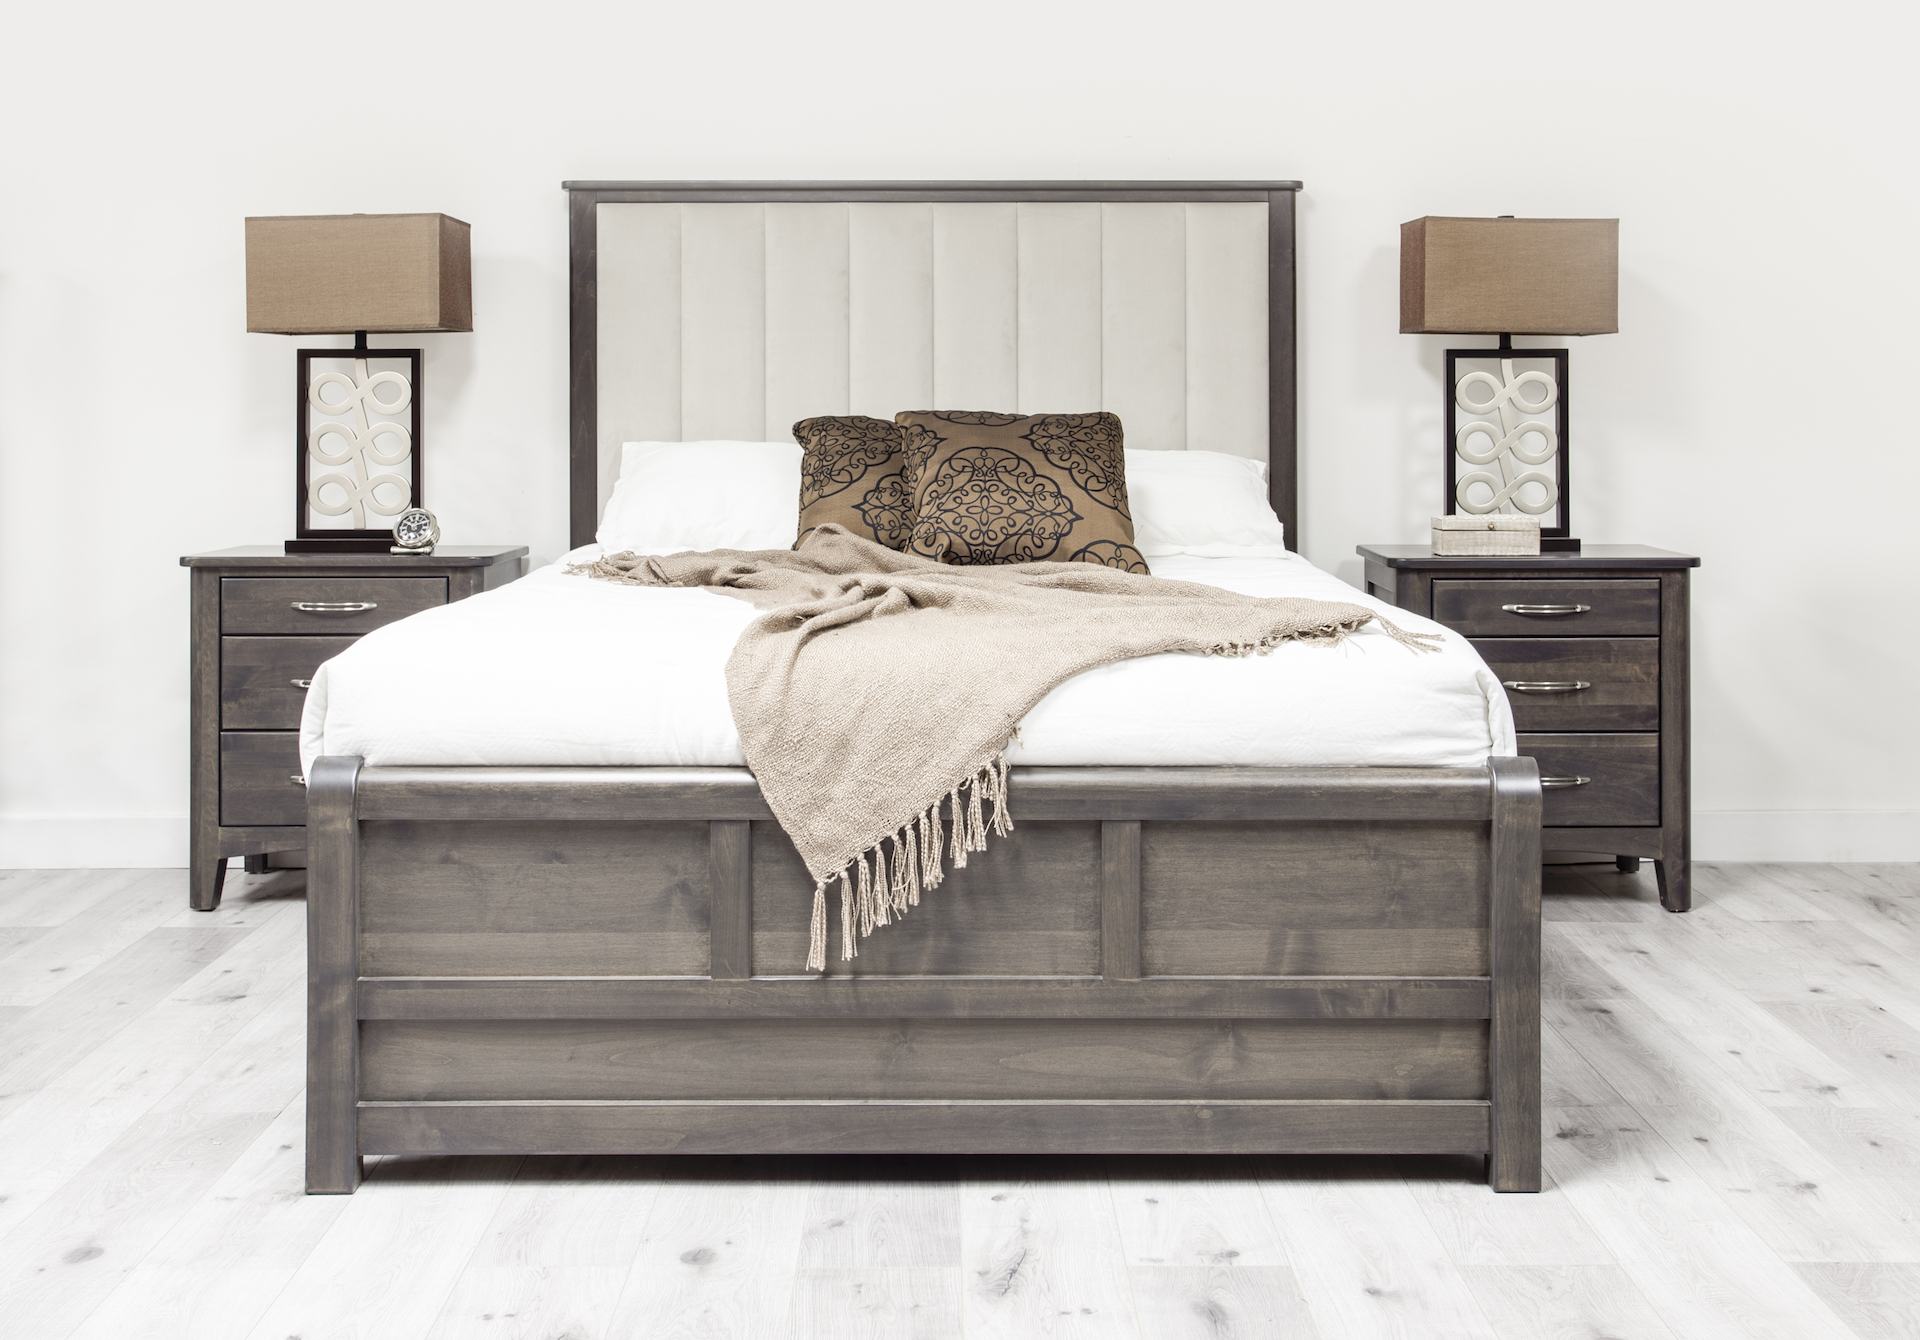 Buy Zara Bedroom Suite Online in Surrey, Vancouver, North Vancouver,  Richmon, Burnaby, New Westminster, Squamish, Whistler, Pemberton, Port  Coquitlam, Maple ridge, Whiterock, Delta, Langley, Cloverdale, Abbotsford,  and Chilliwack